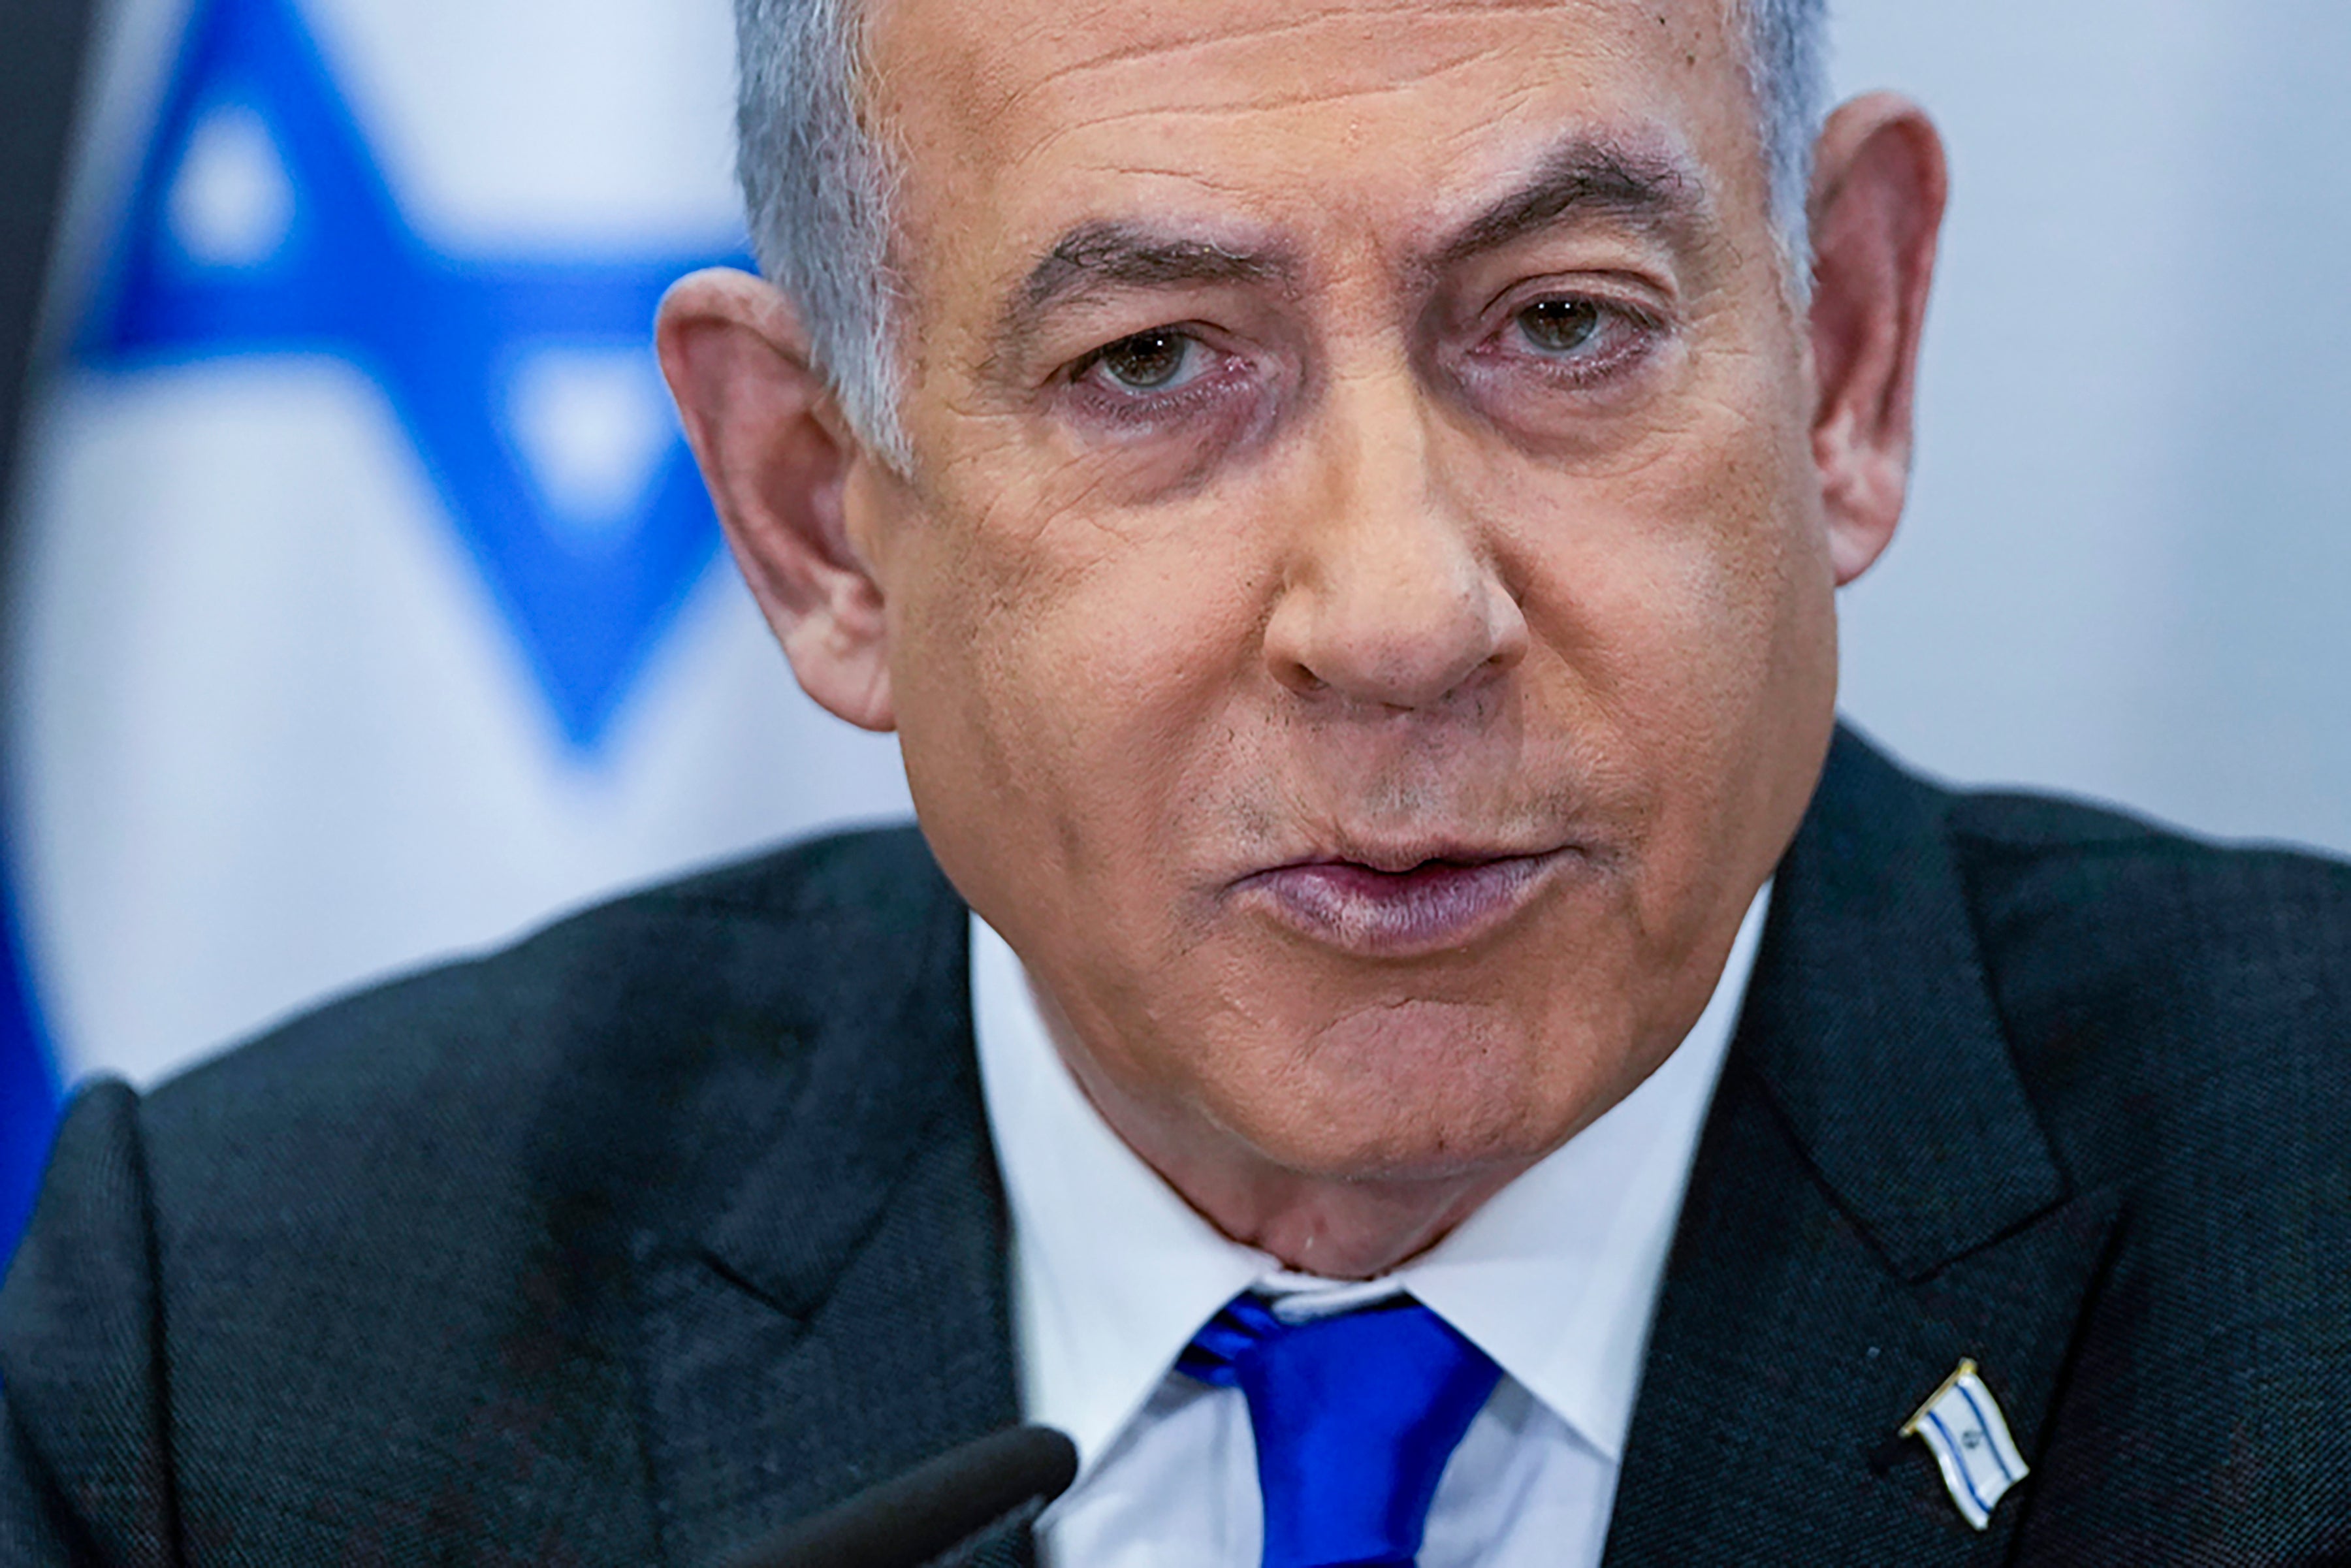 Benjamin Netanyahu is already facing a collapse of his coalition government